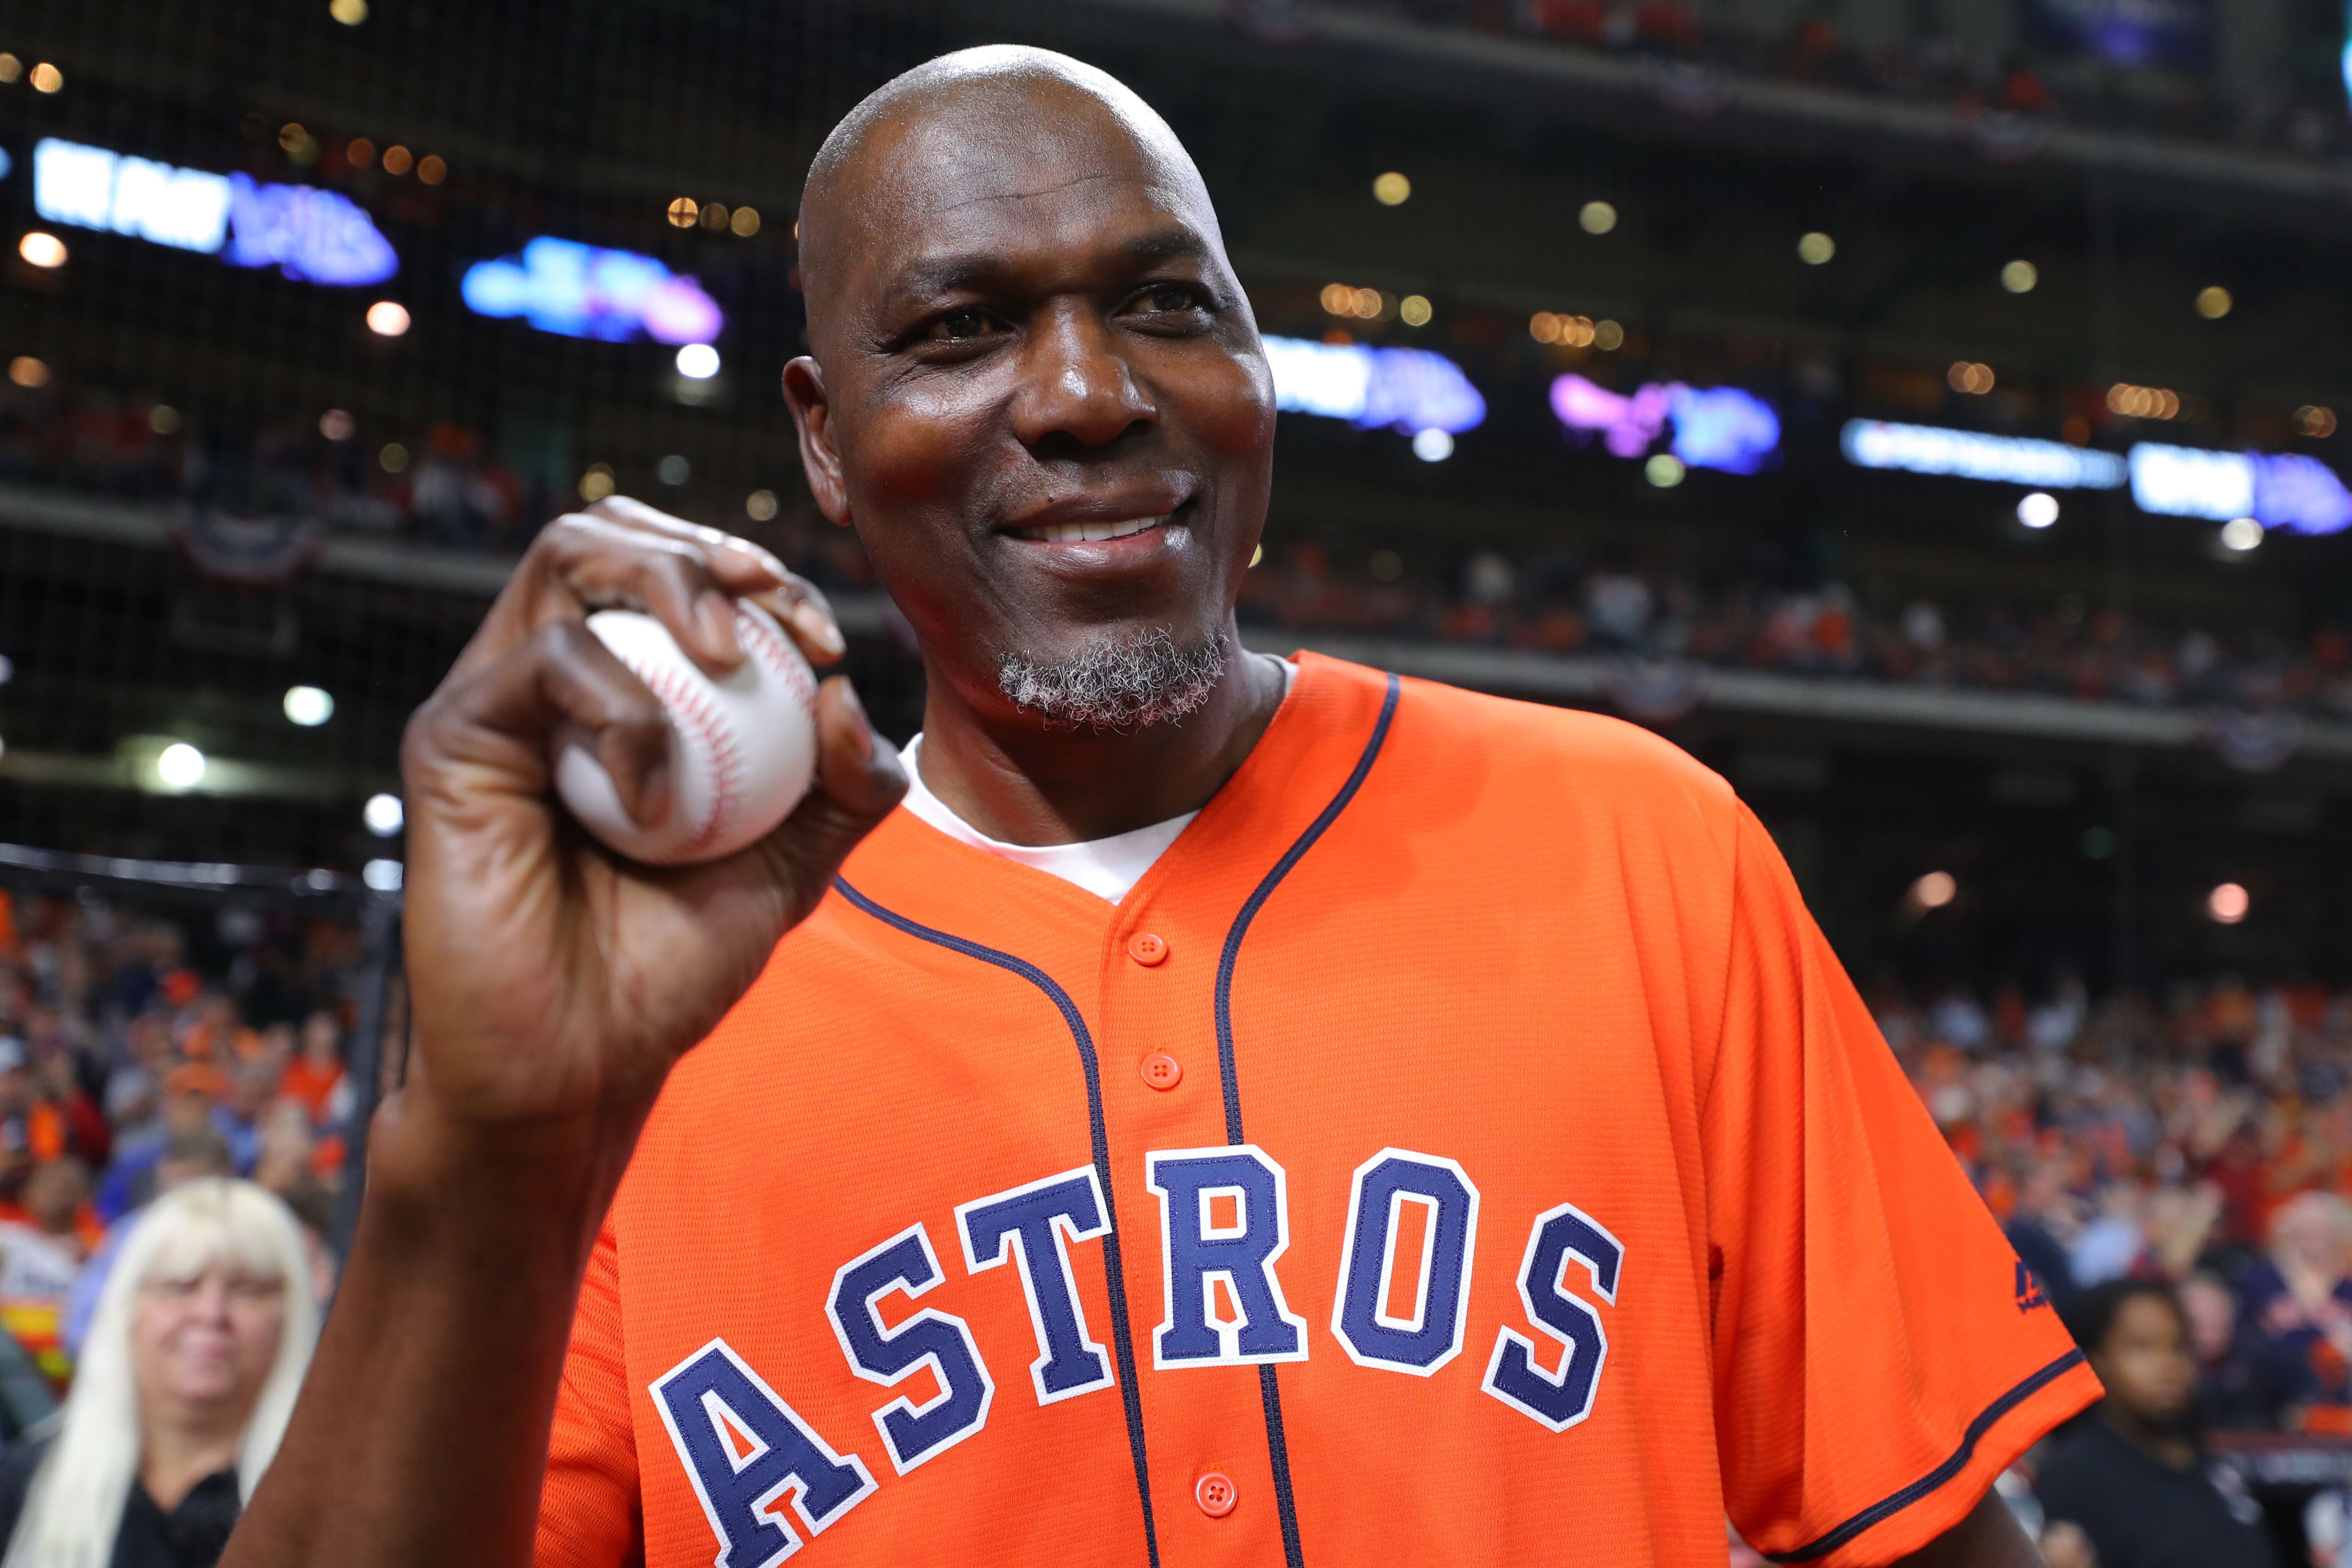 Hakeem Olajuwon holds the game ball prior to Game 6 of the 2019 World Series between the Washington Nationals and the Houston Astros at Minute Maid Park on Tuesday, October 29, 2019 in Houston, Texas. | Source: Getty Images